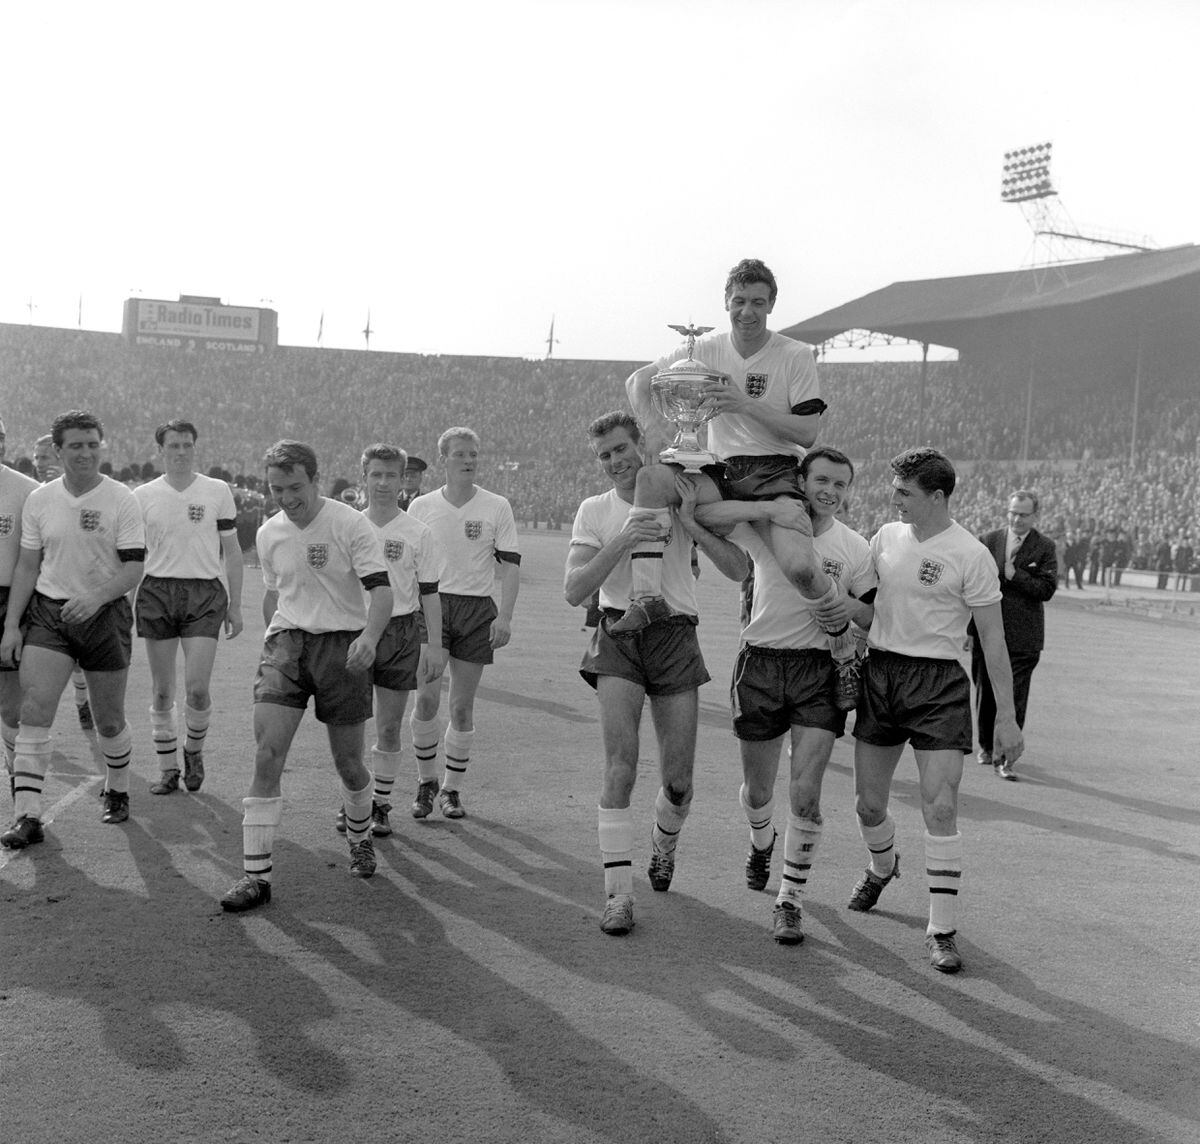 England's victorious players carry their captain aloft with the Championship Trophy. (l-r) Bobby Smith, Bobby Robson, Jimmy Greaves, Bryan Douglas, Ron Flowers, Peter Swan, captain Johnny Haynes (with trophy), Jimmy Armfield and Mike McNeil.